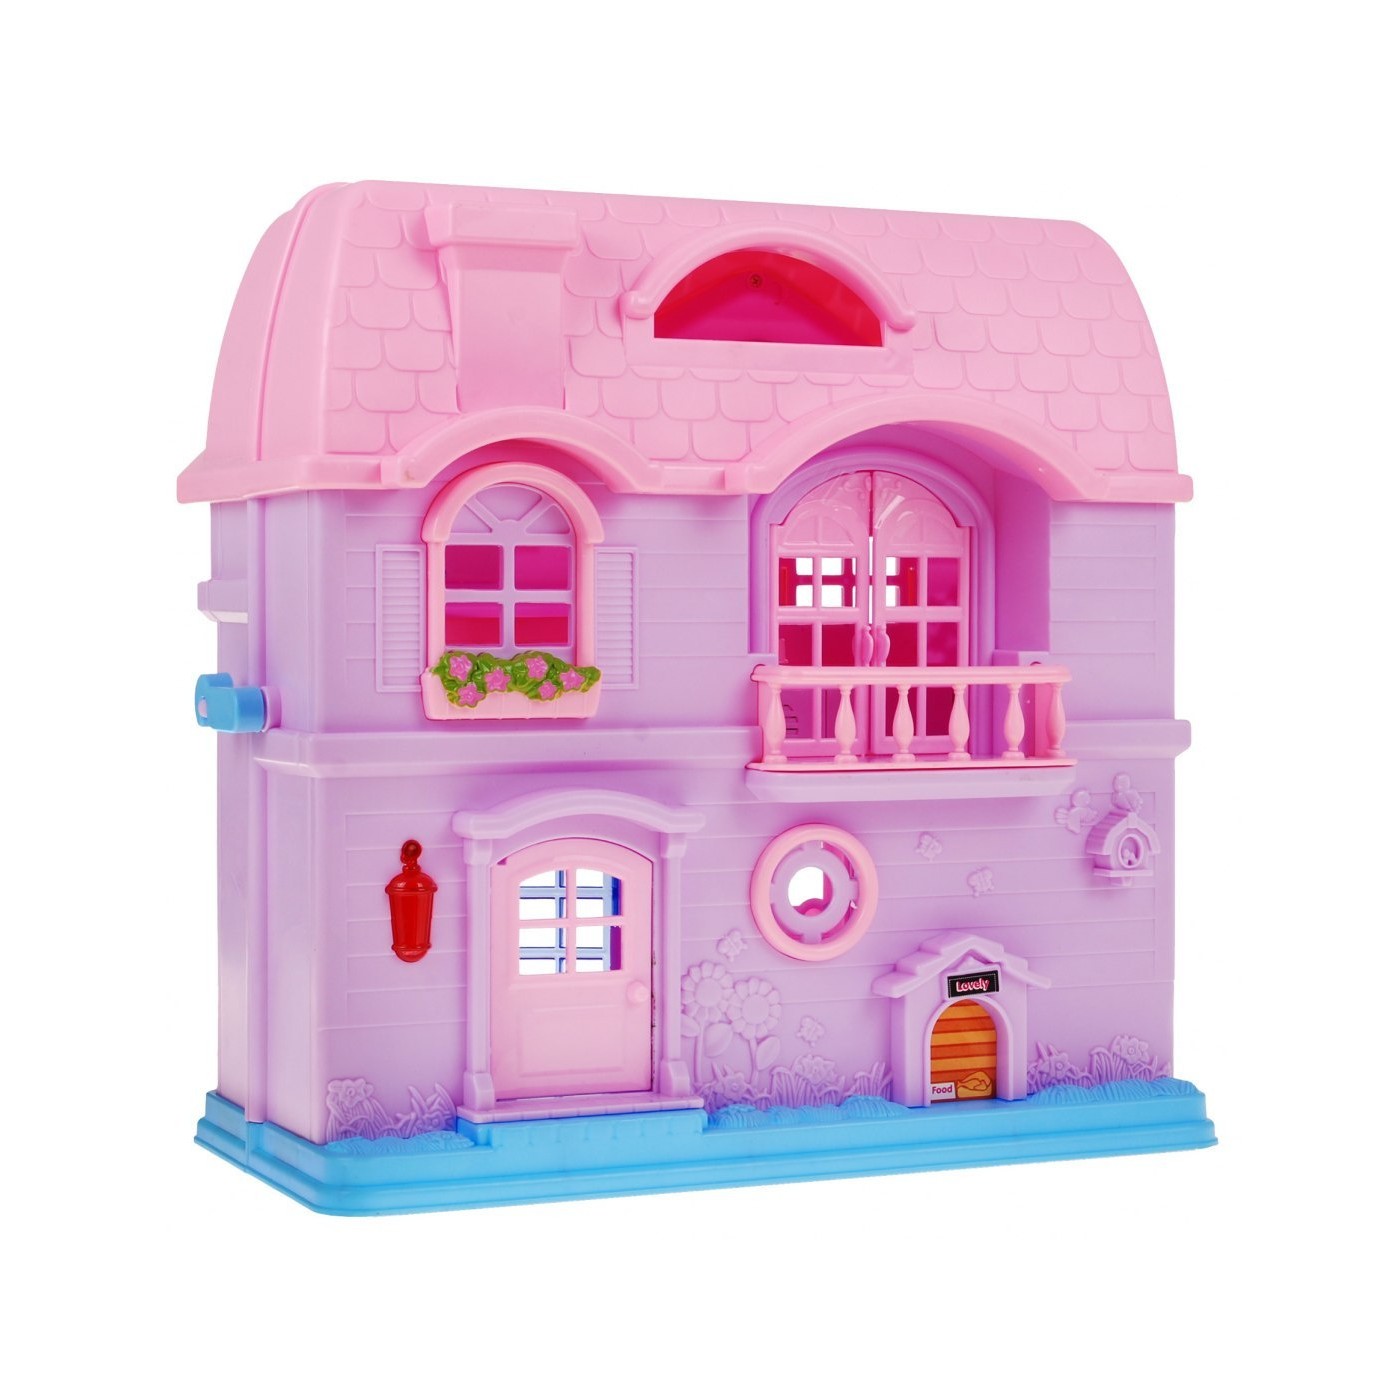 Big house with pink roof